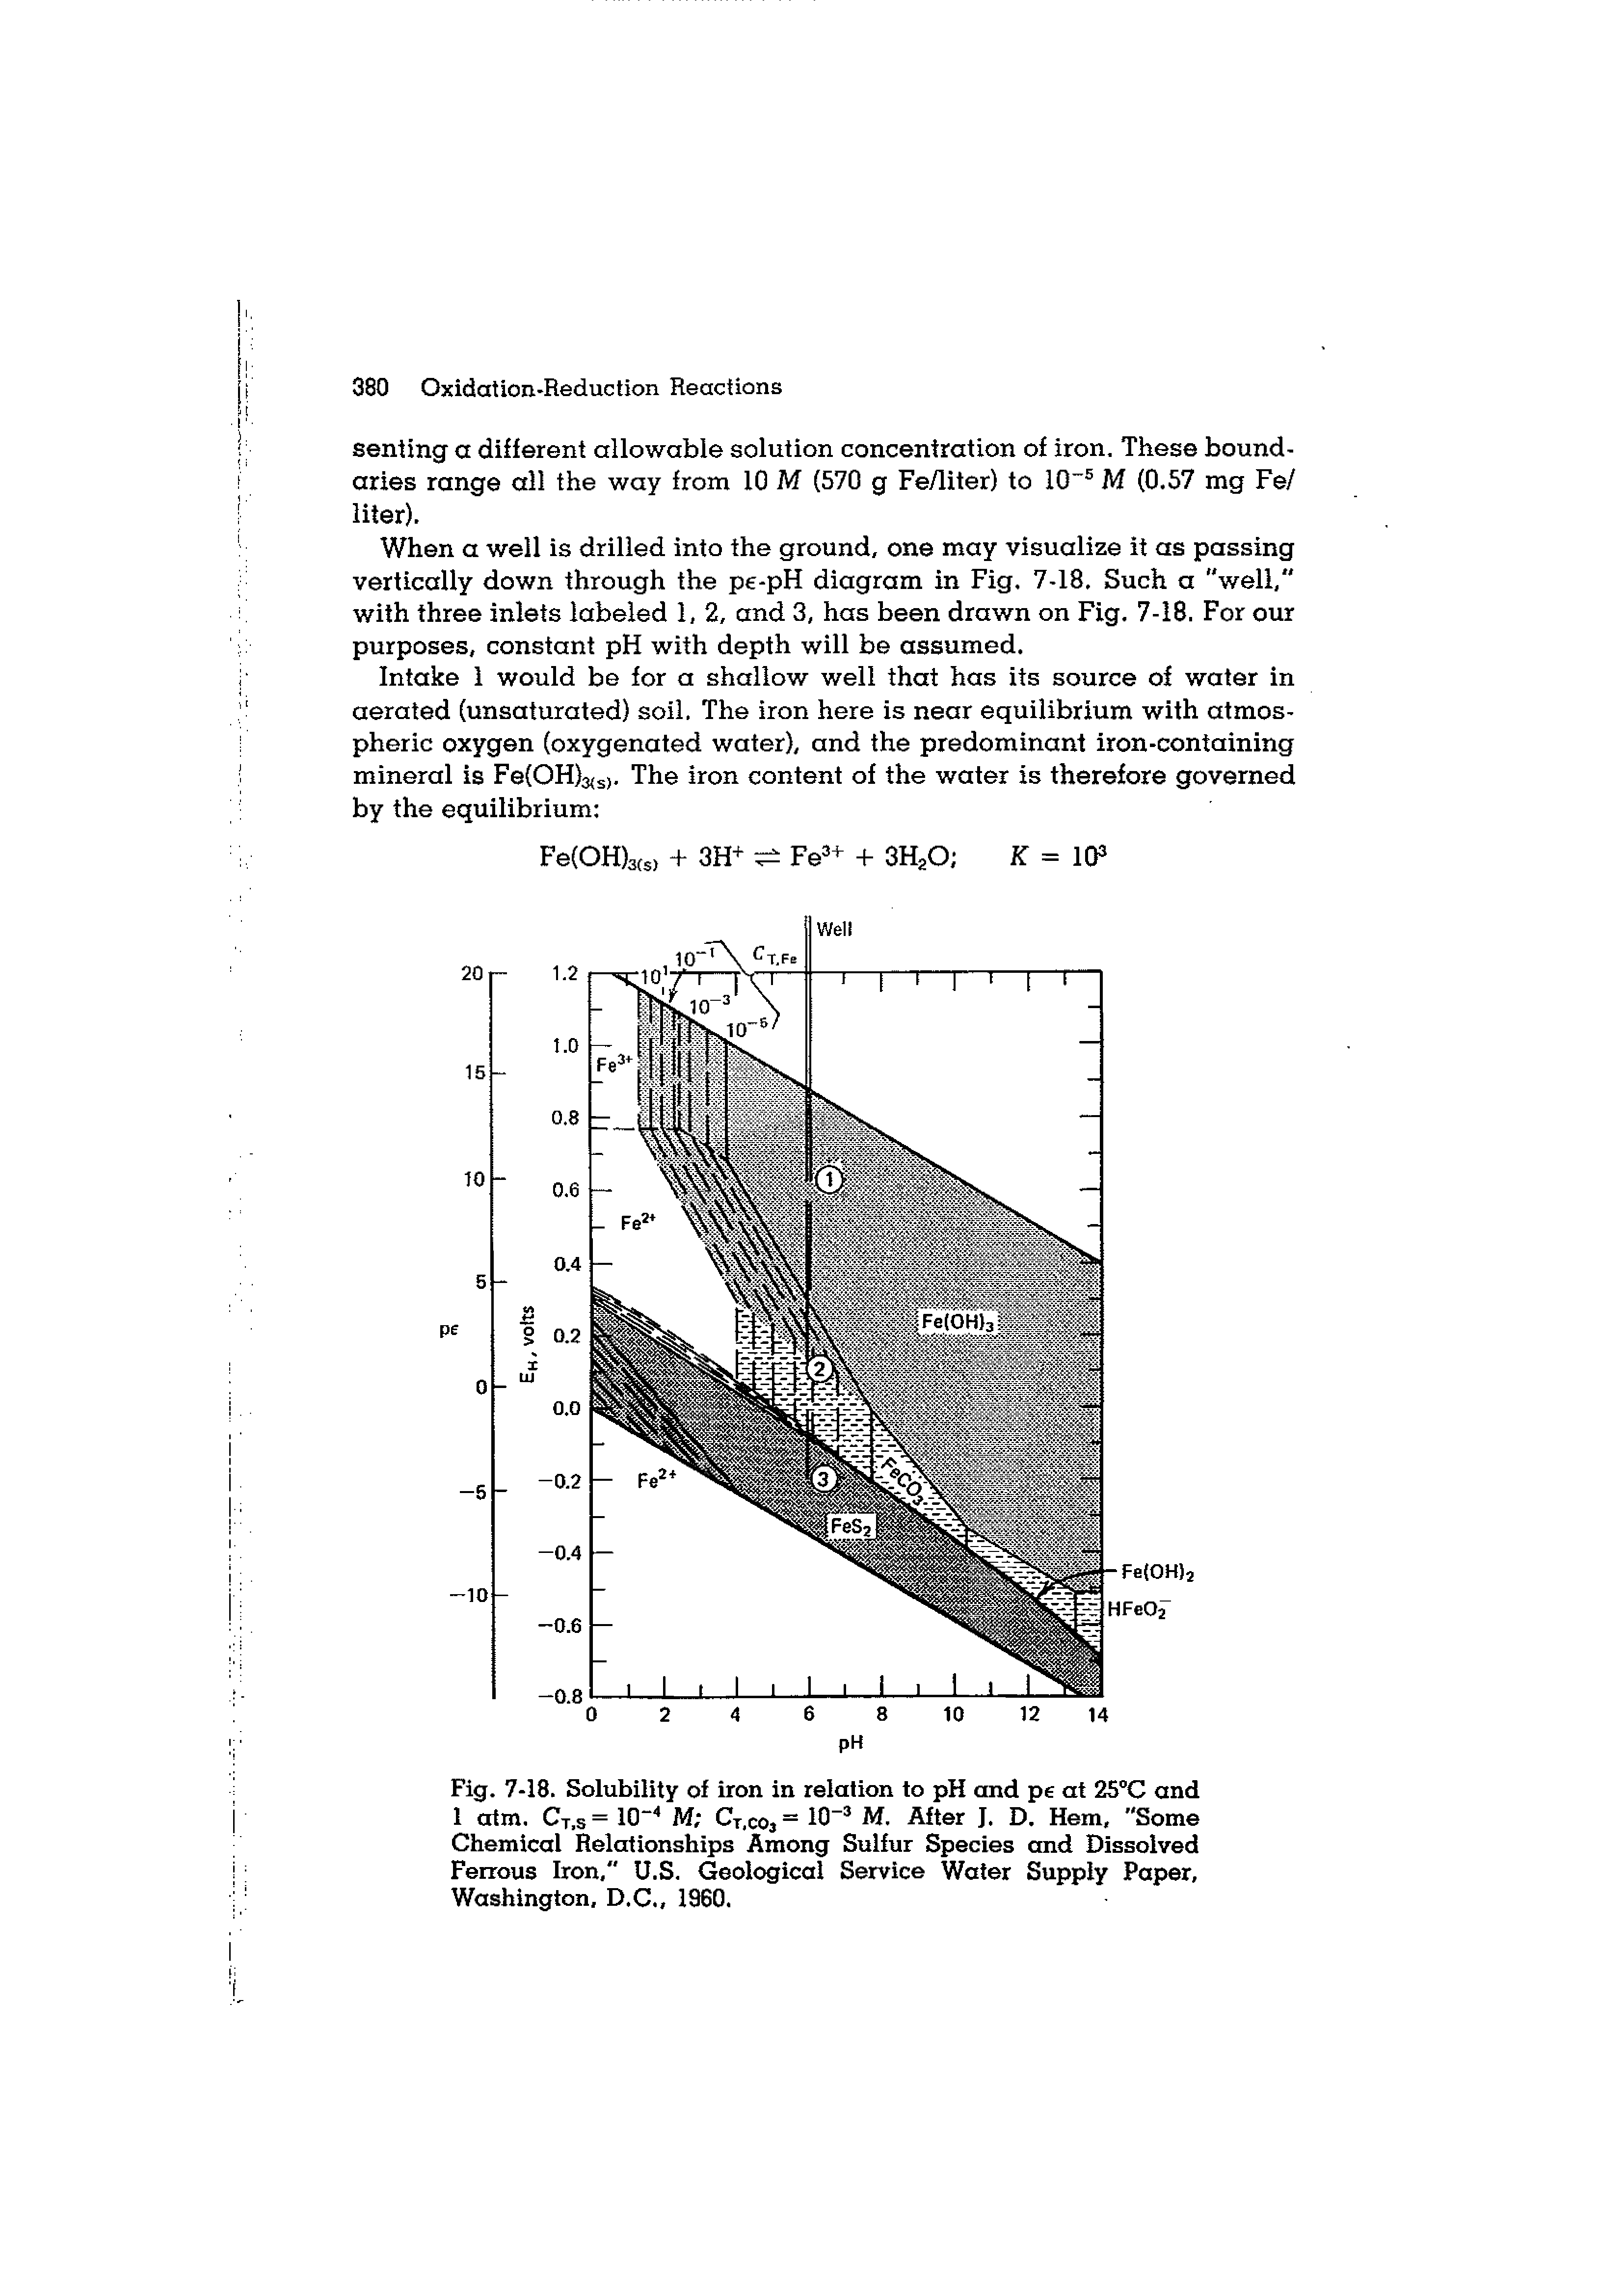 Fig. 7-18. Solubility of iron in relation to pH and pe at 25°C and 1 atm. Ct.s = 10 M Ct.coj = 10"= M. After J. D. Hem, "Some Chemical Relationships Among Sulfur Species and Dissolved Ferrous Iron," U.S. Geological Service Water Supply Paper, Washington, D.C., 1960.